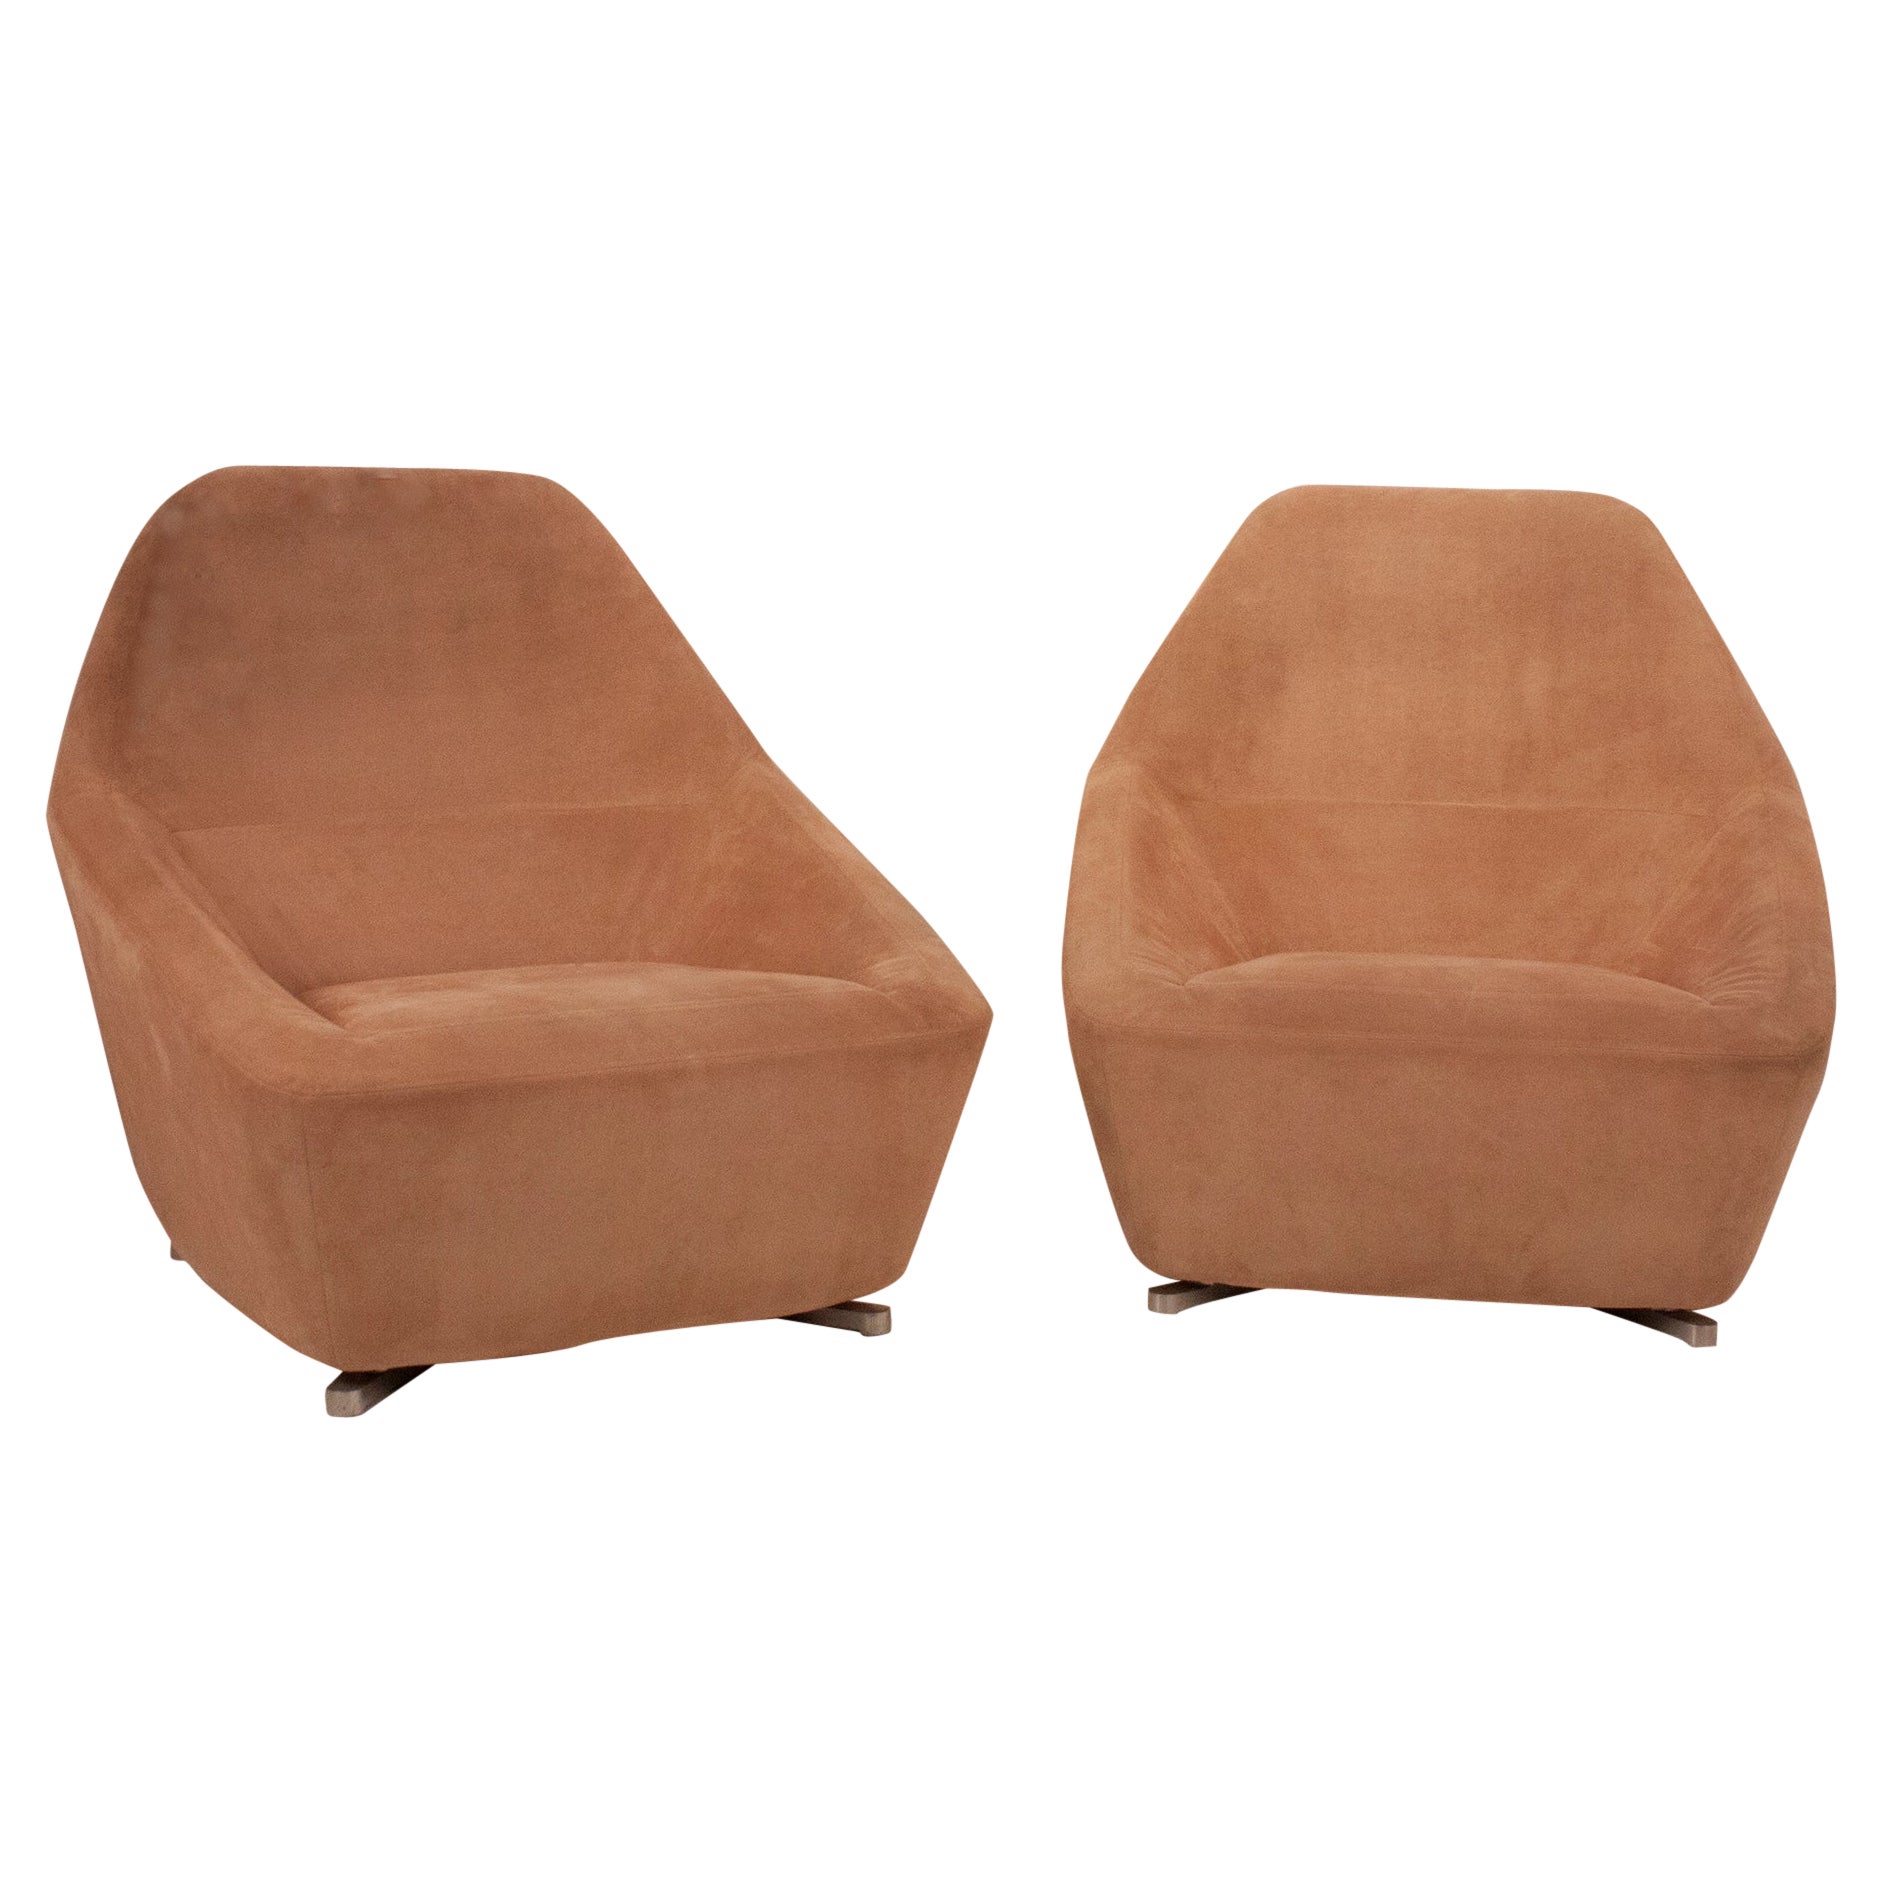 Modern Pair of Pink Suede Armchairs,  by François Bauchet for Cinna, 2000's